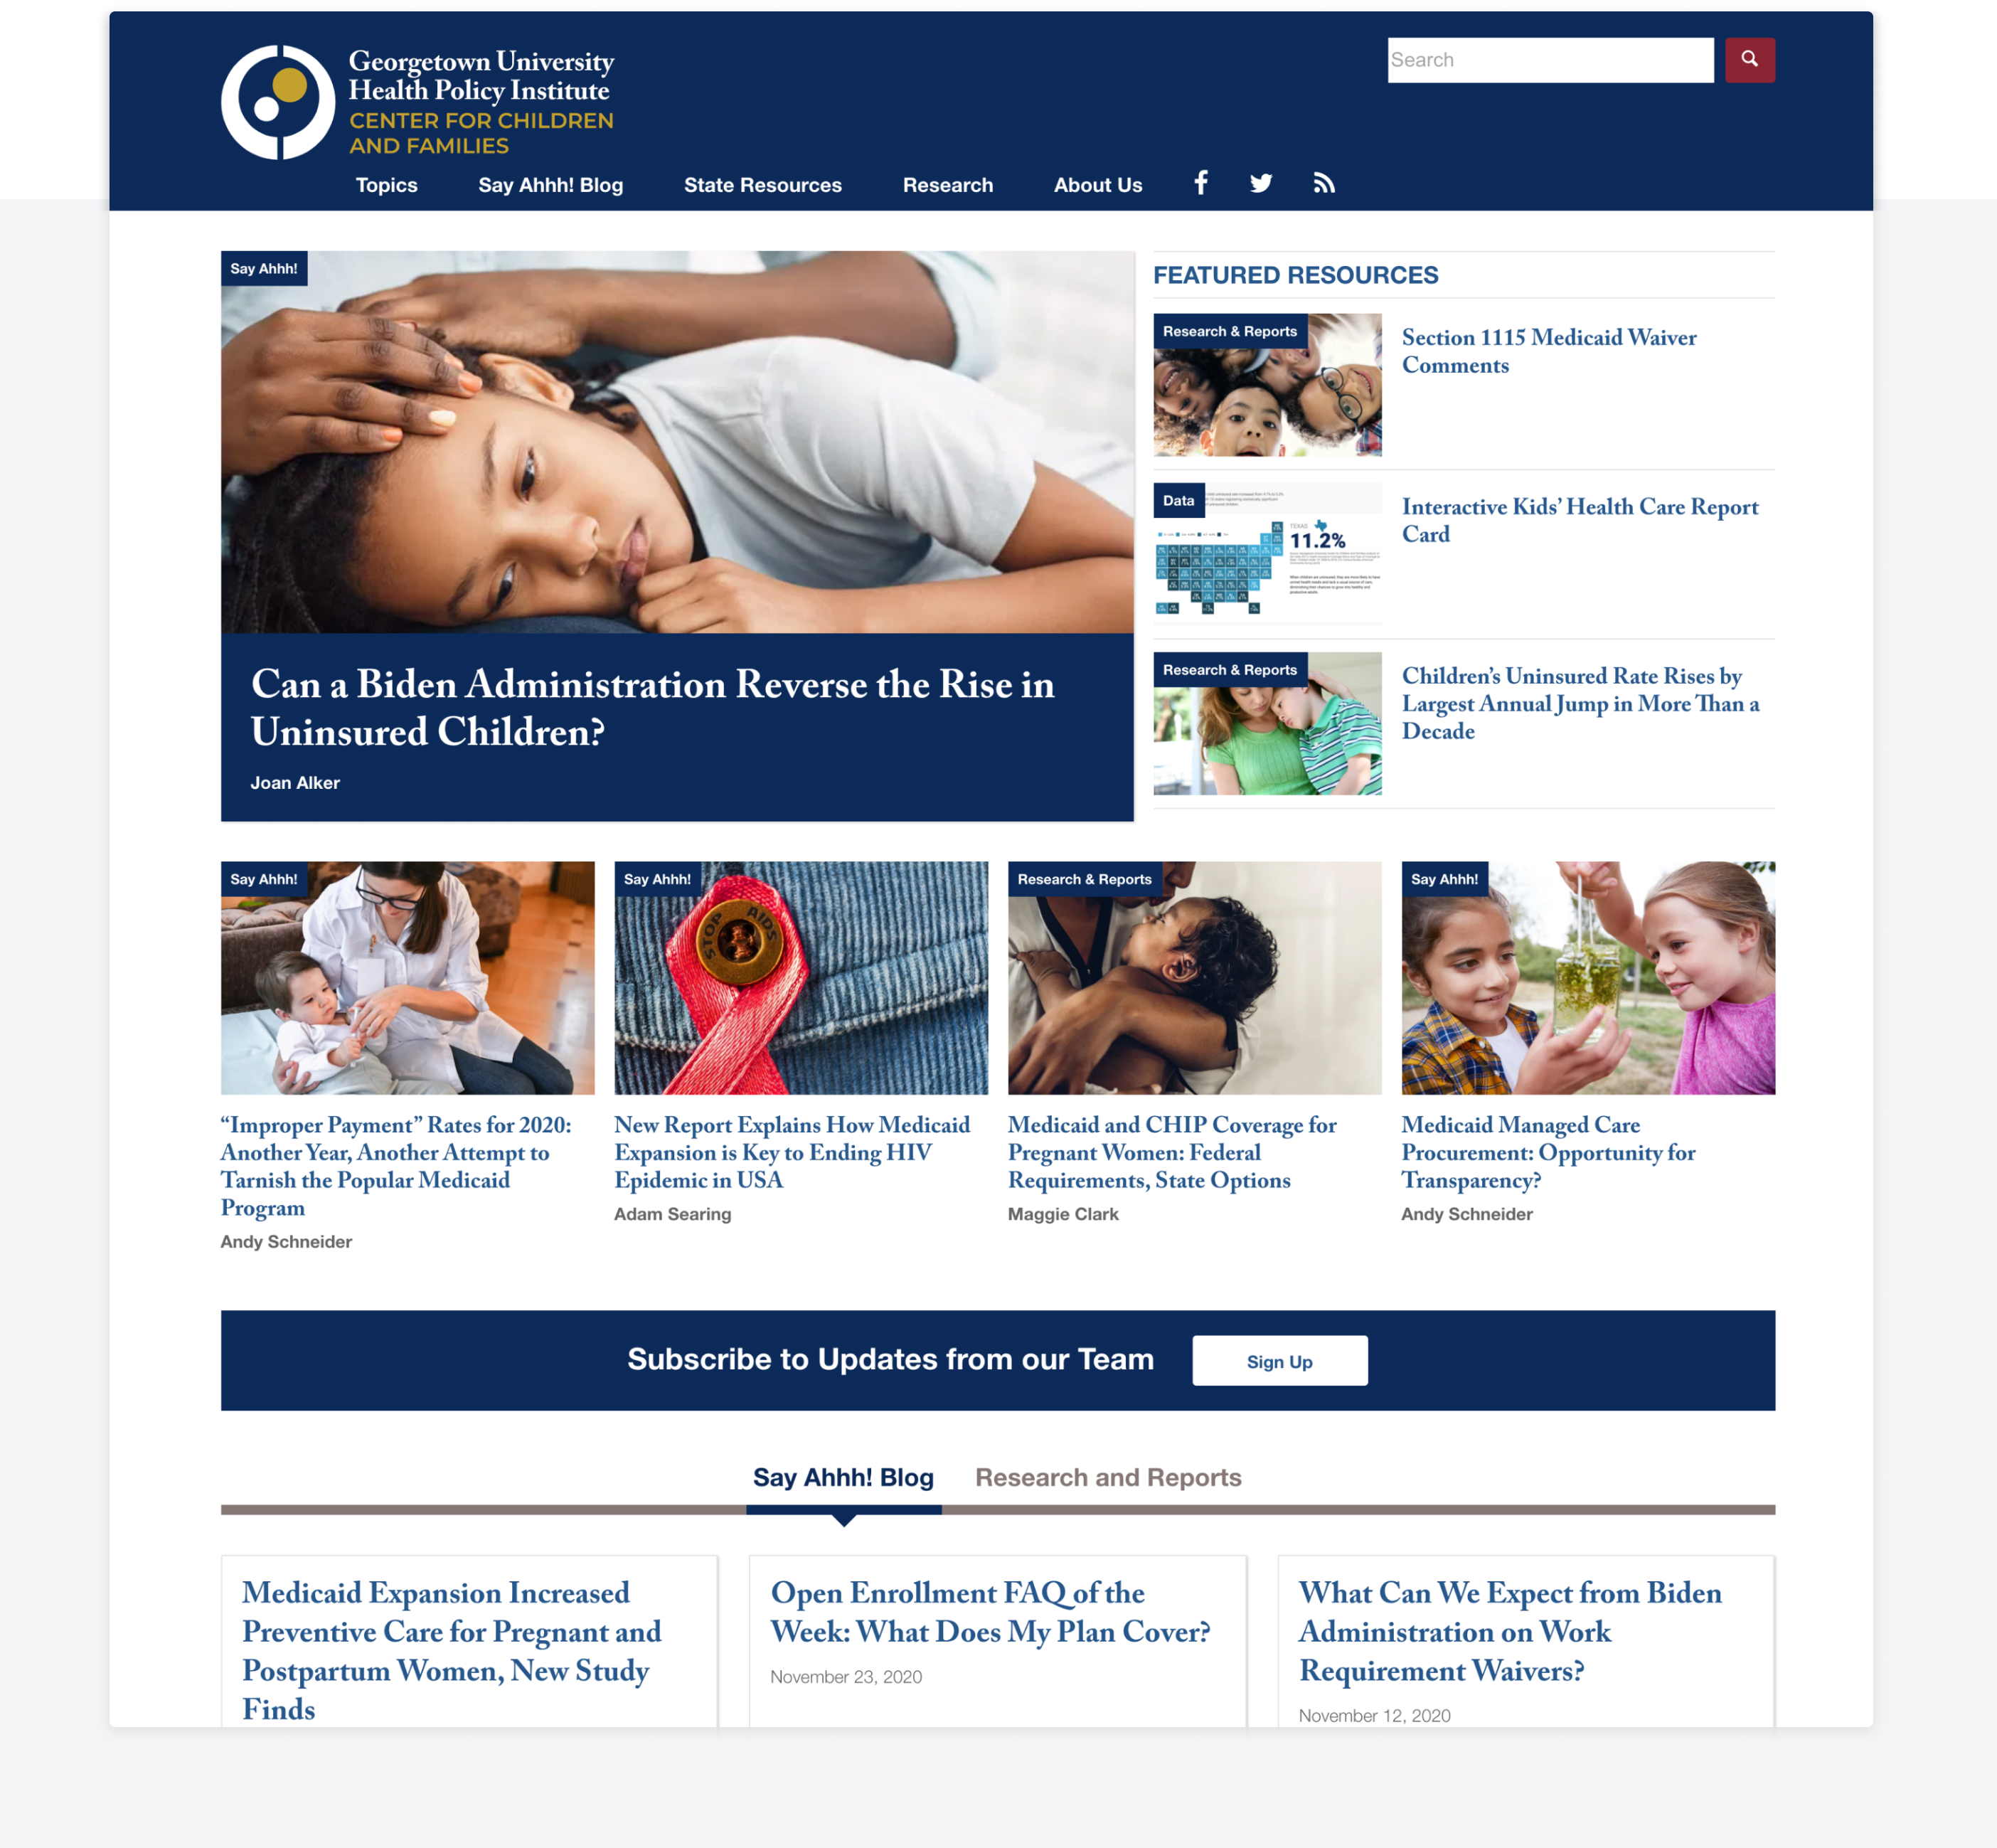 The main page of Georgetown CCF with navigation, featured article, and additional content